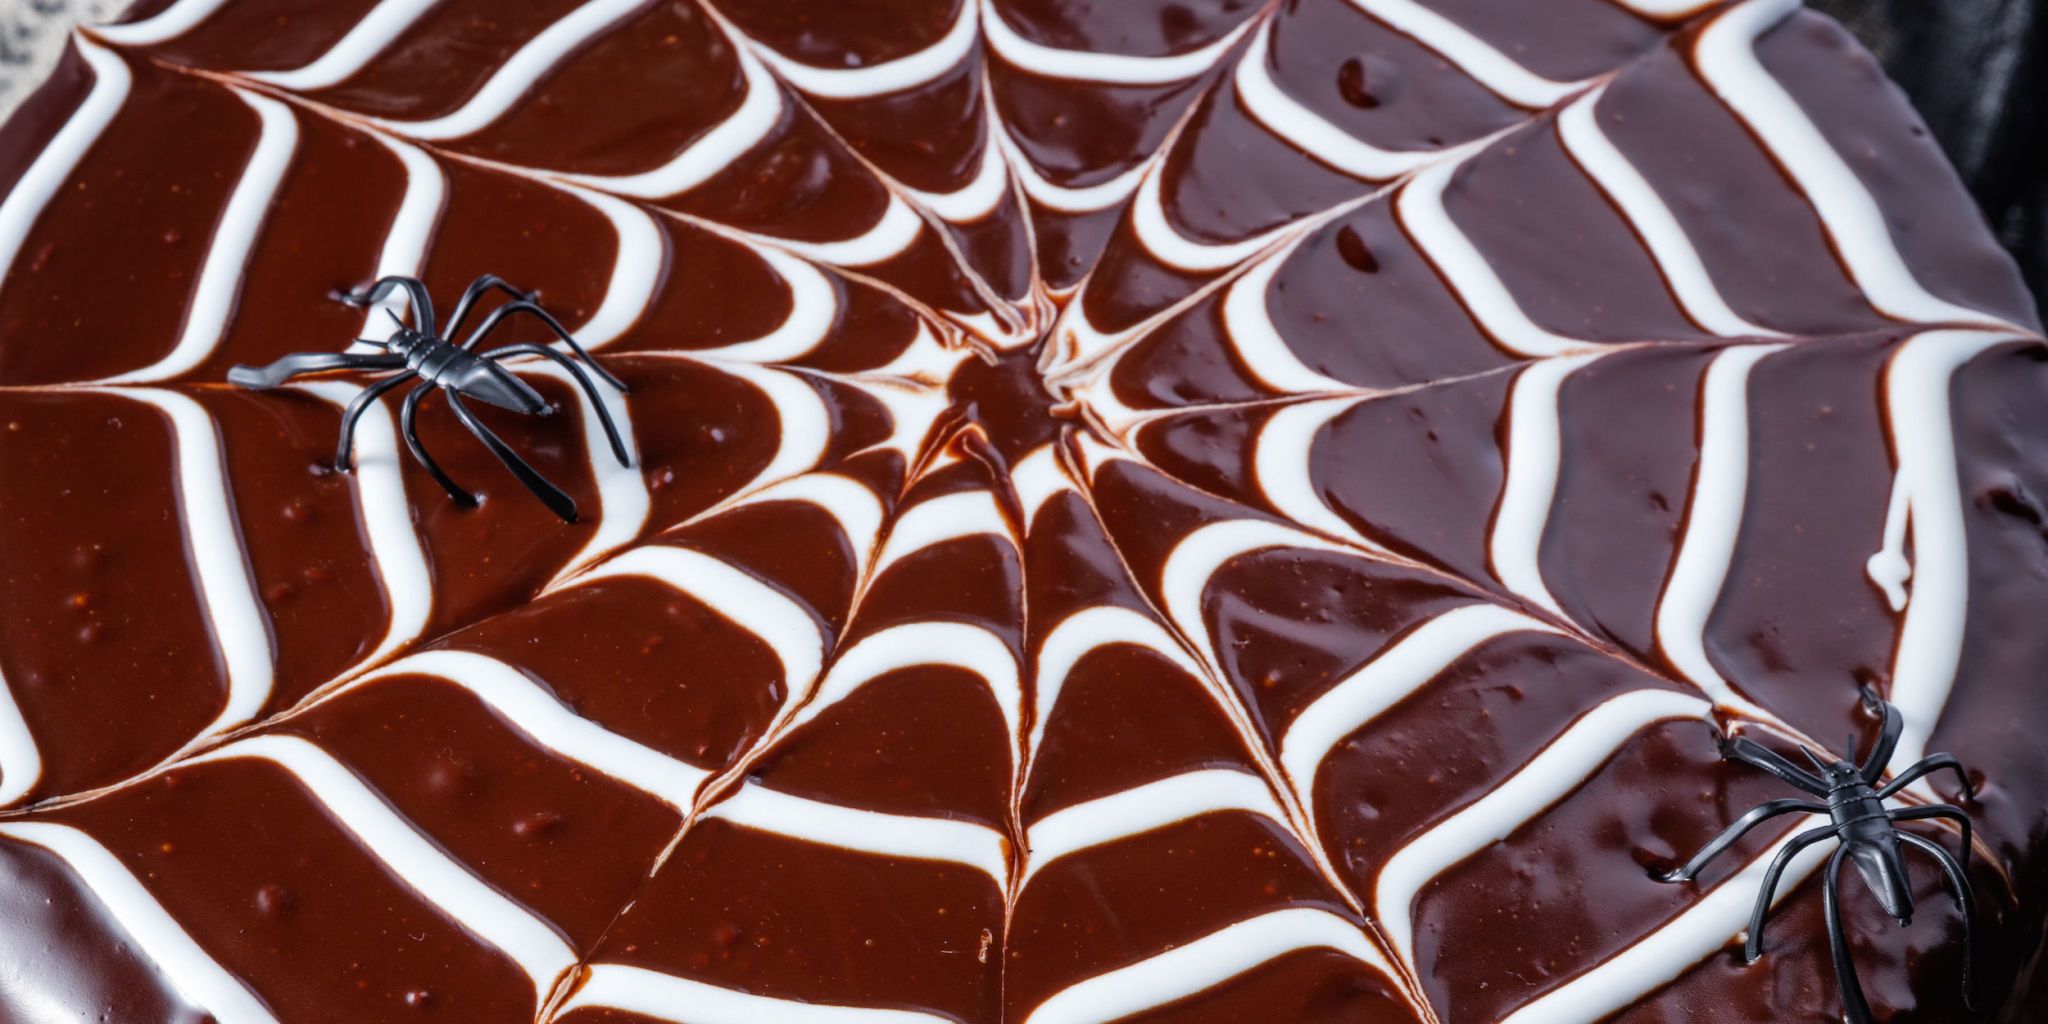 How to Make Spooky Spiderweb Cake - Woman's World